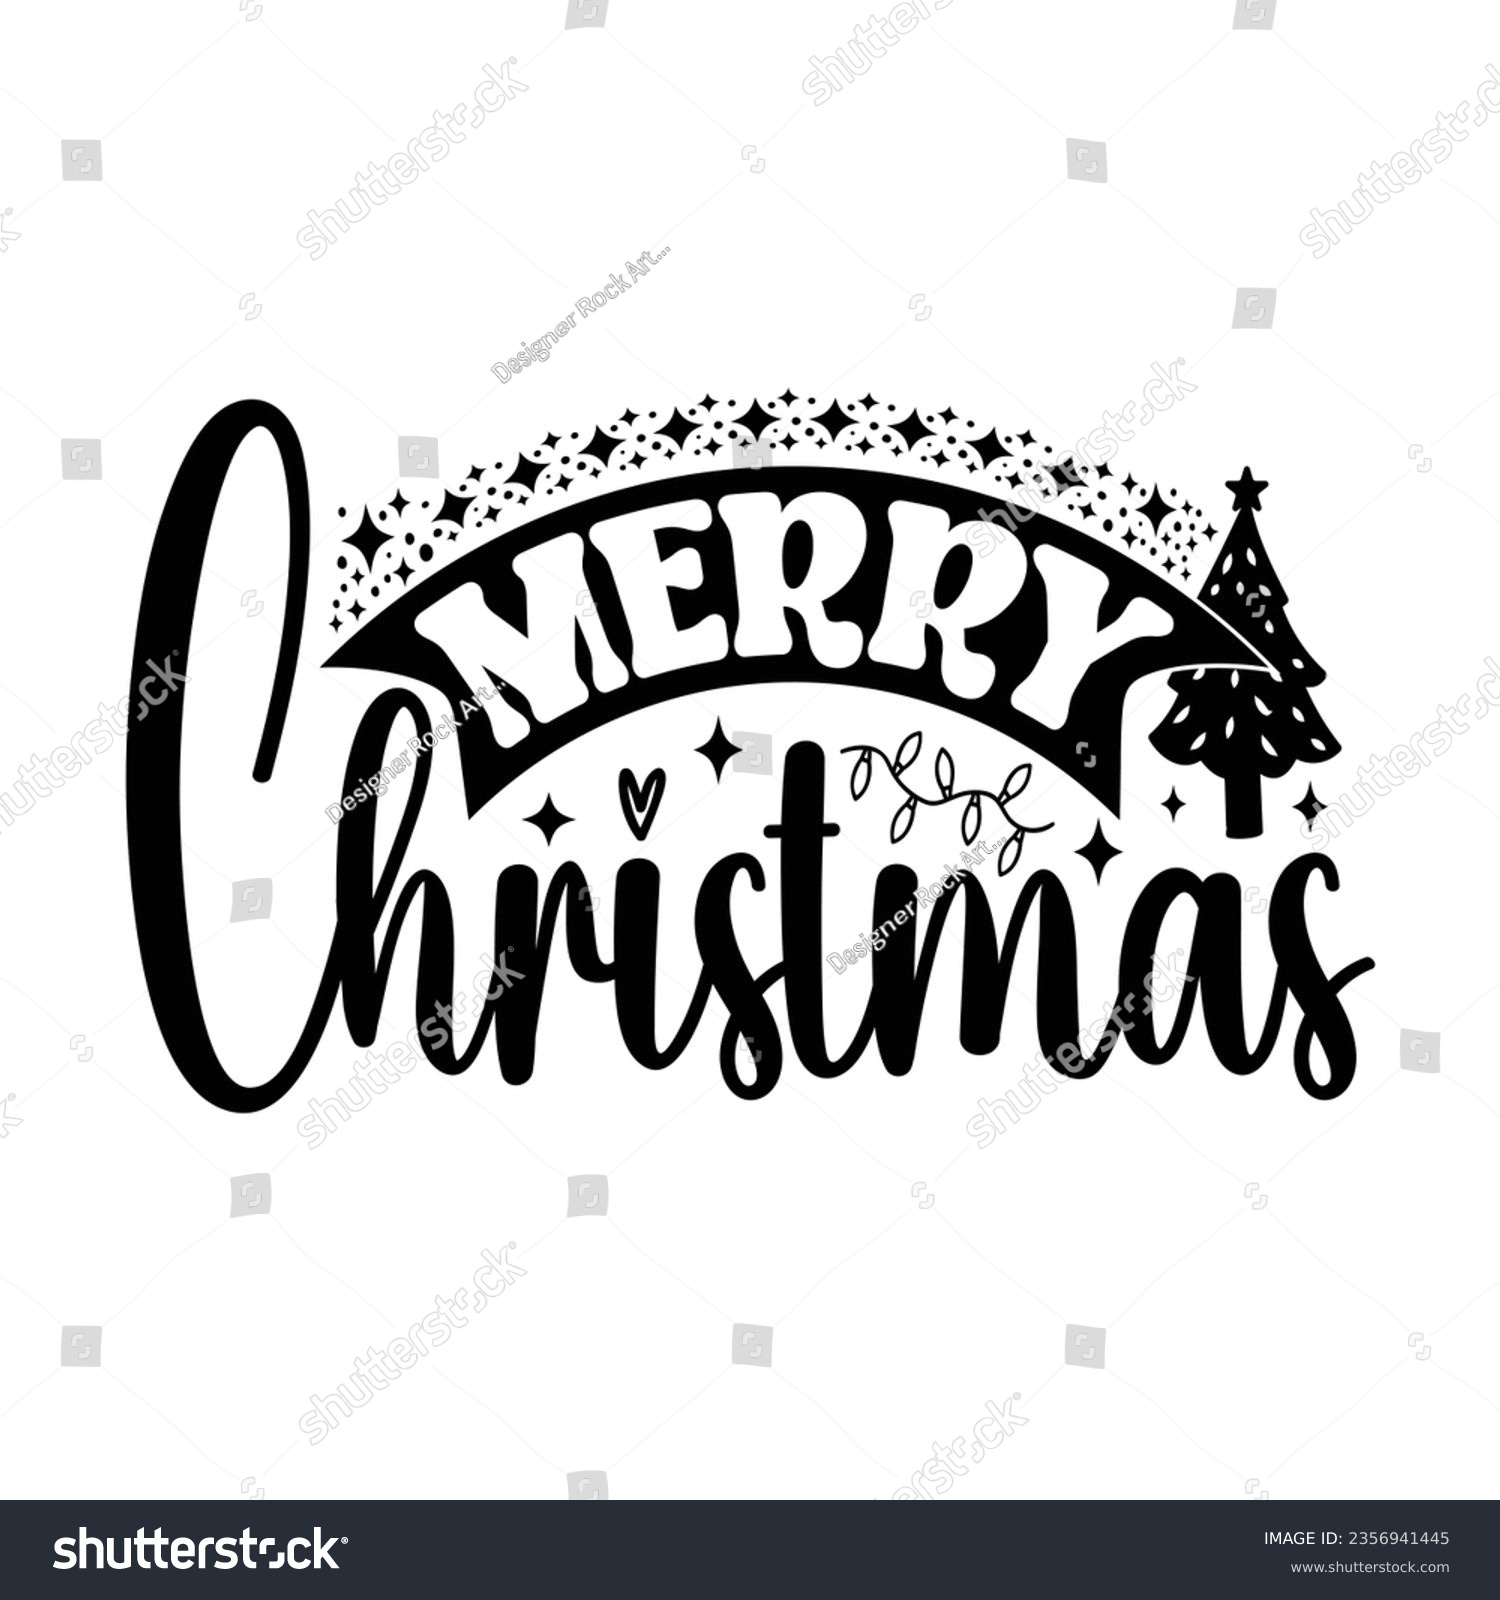 SVG of Merry Christmas - Hand drawn lettering for Christmas greetings cards, x mas shirt design svg